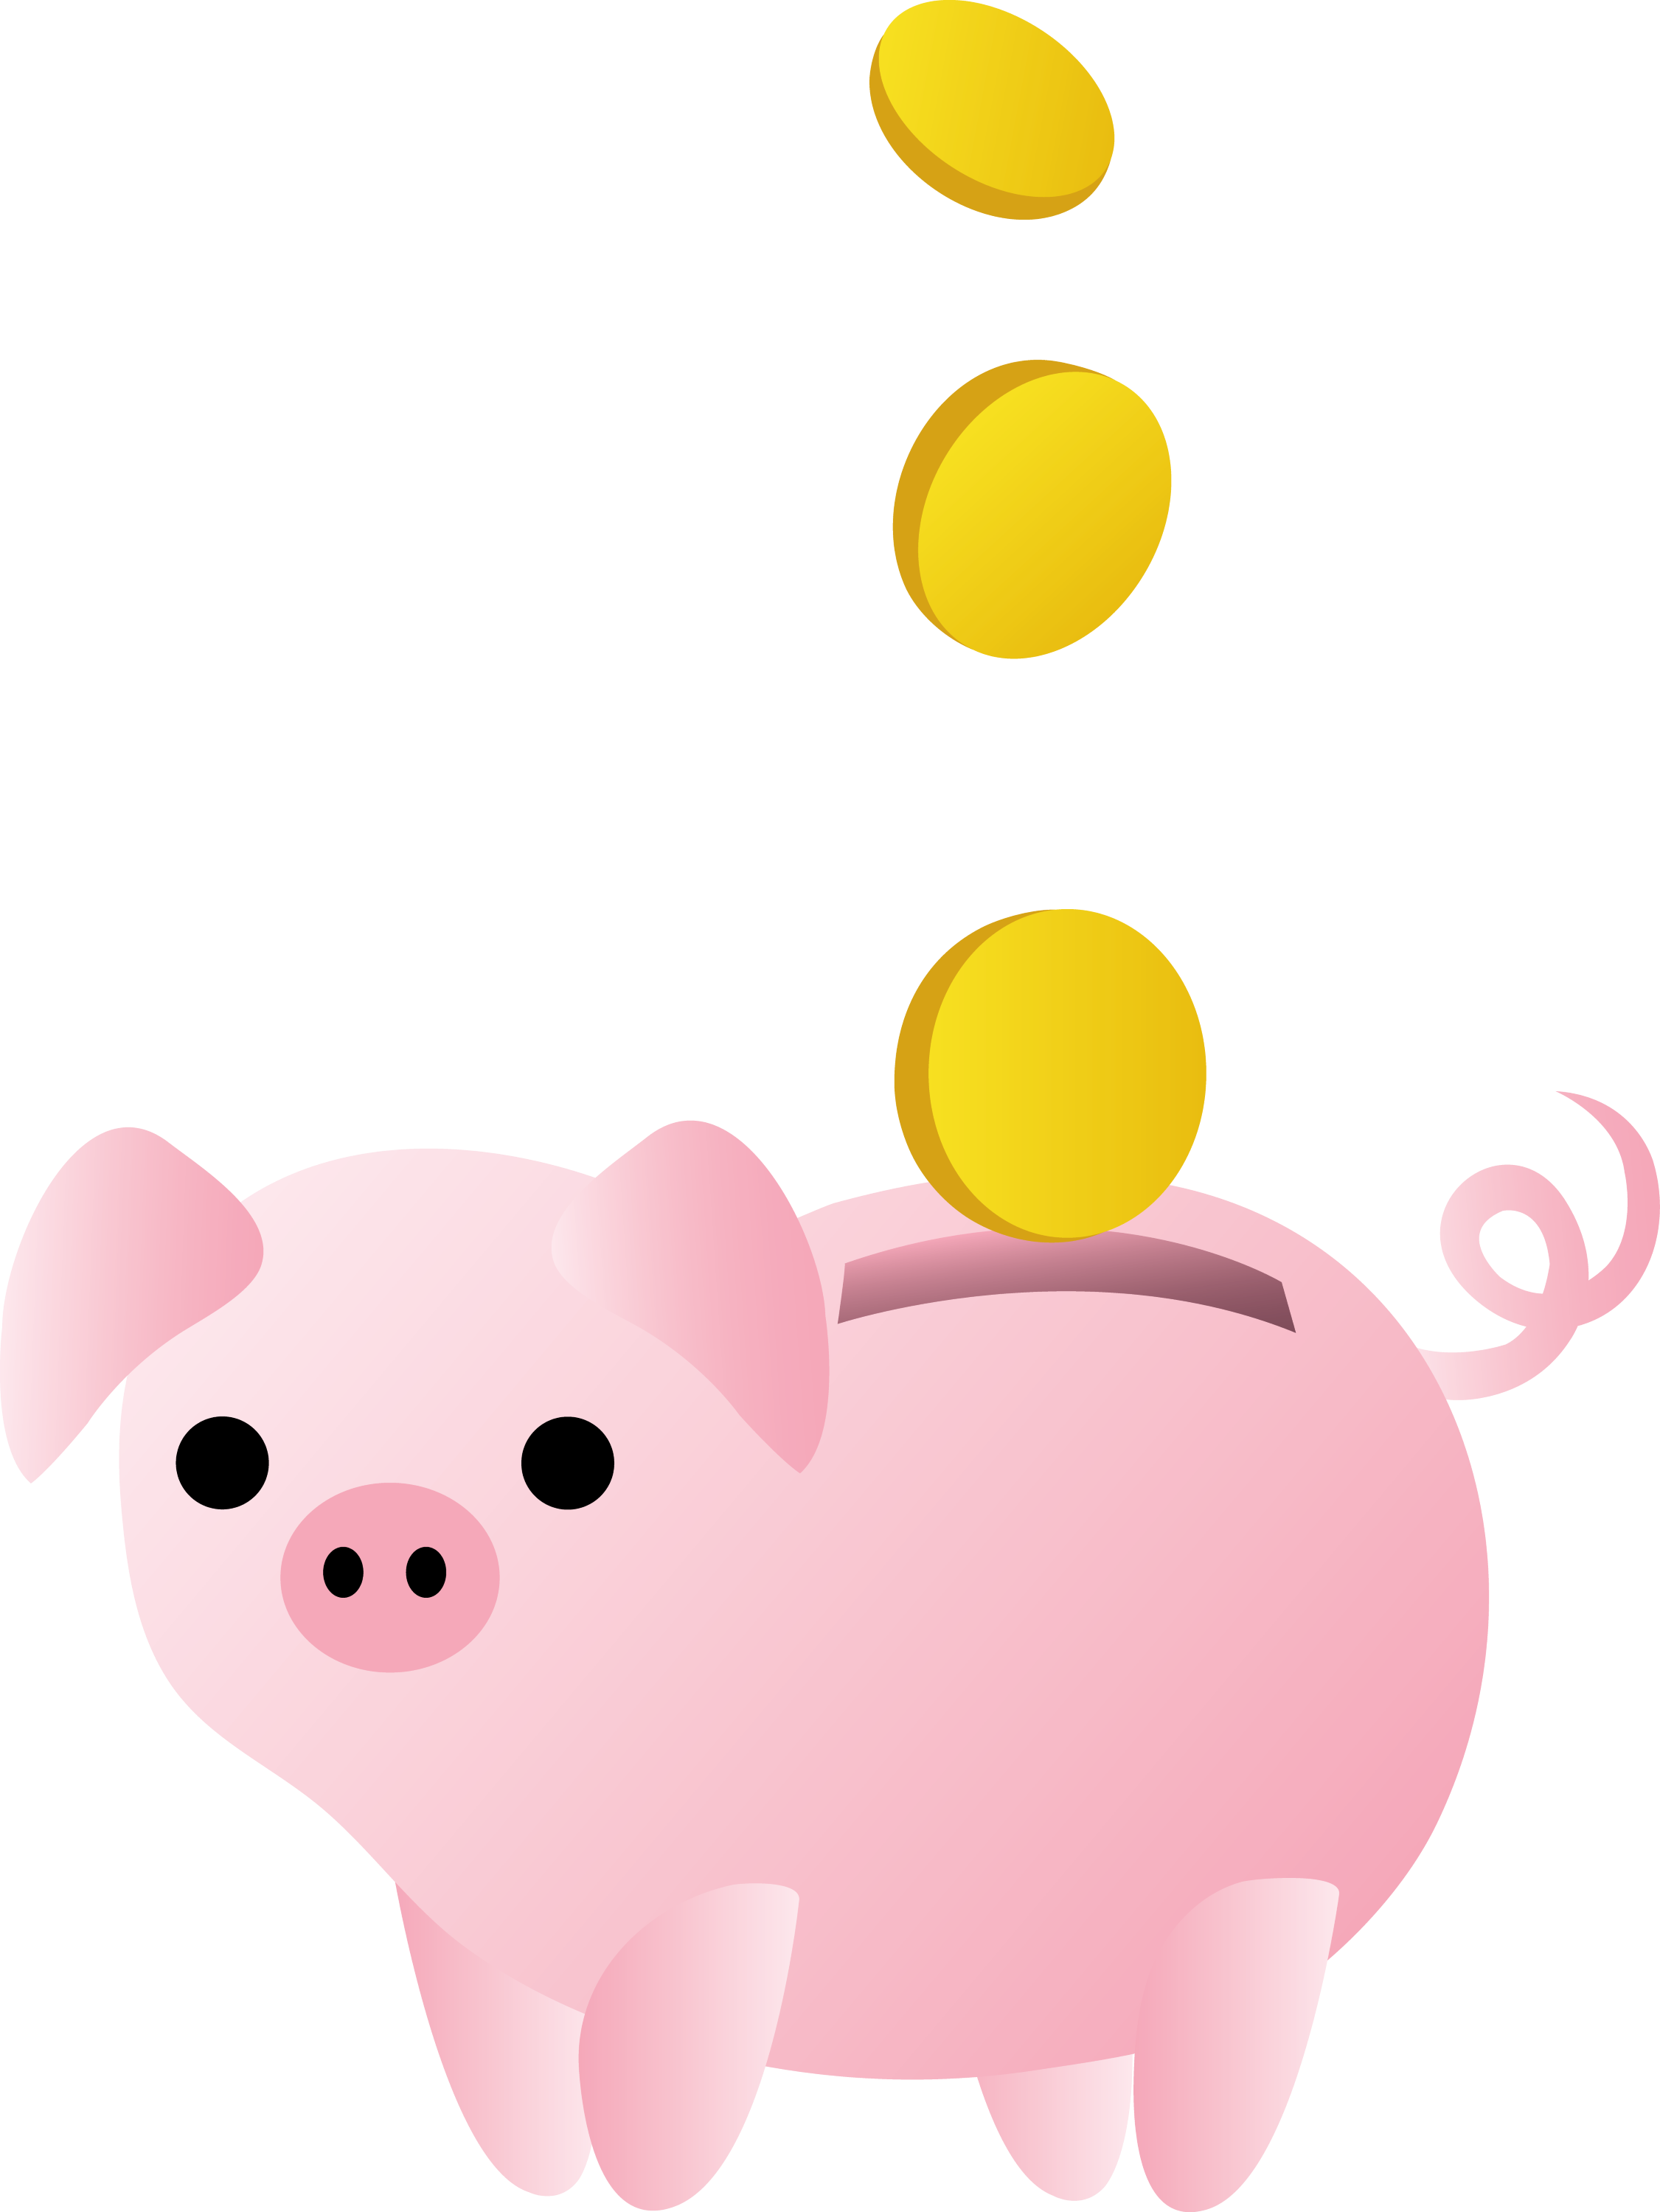 Piggy Bank With Coins - Free Clip Art